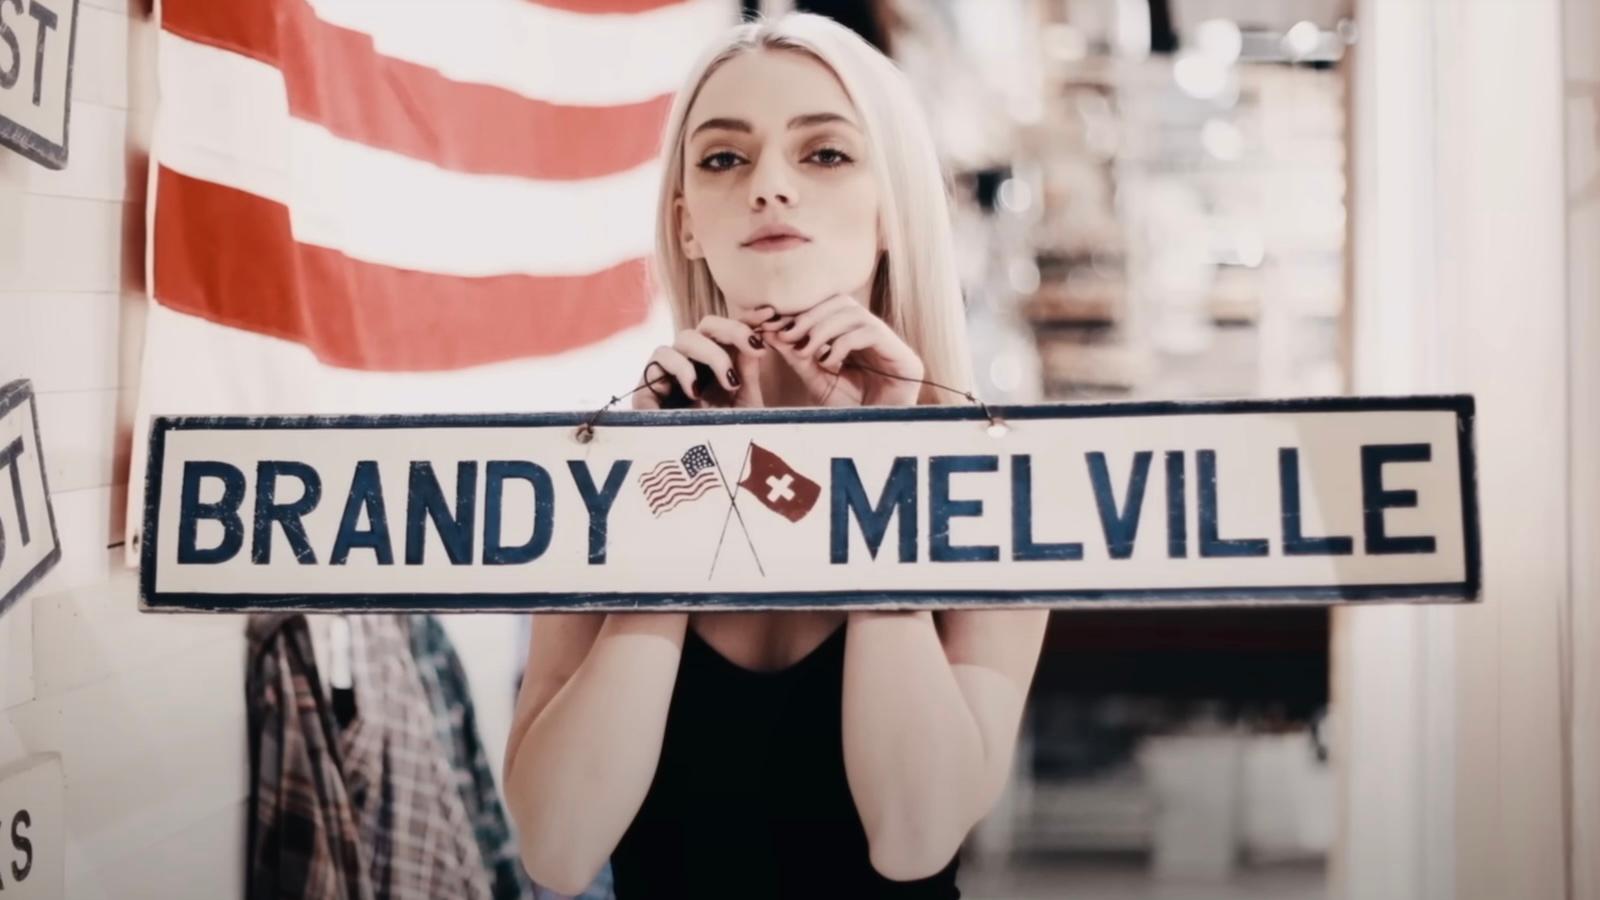 Still from Brandy Hellville & the Cult of Fast Fashion